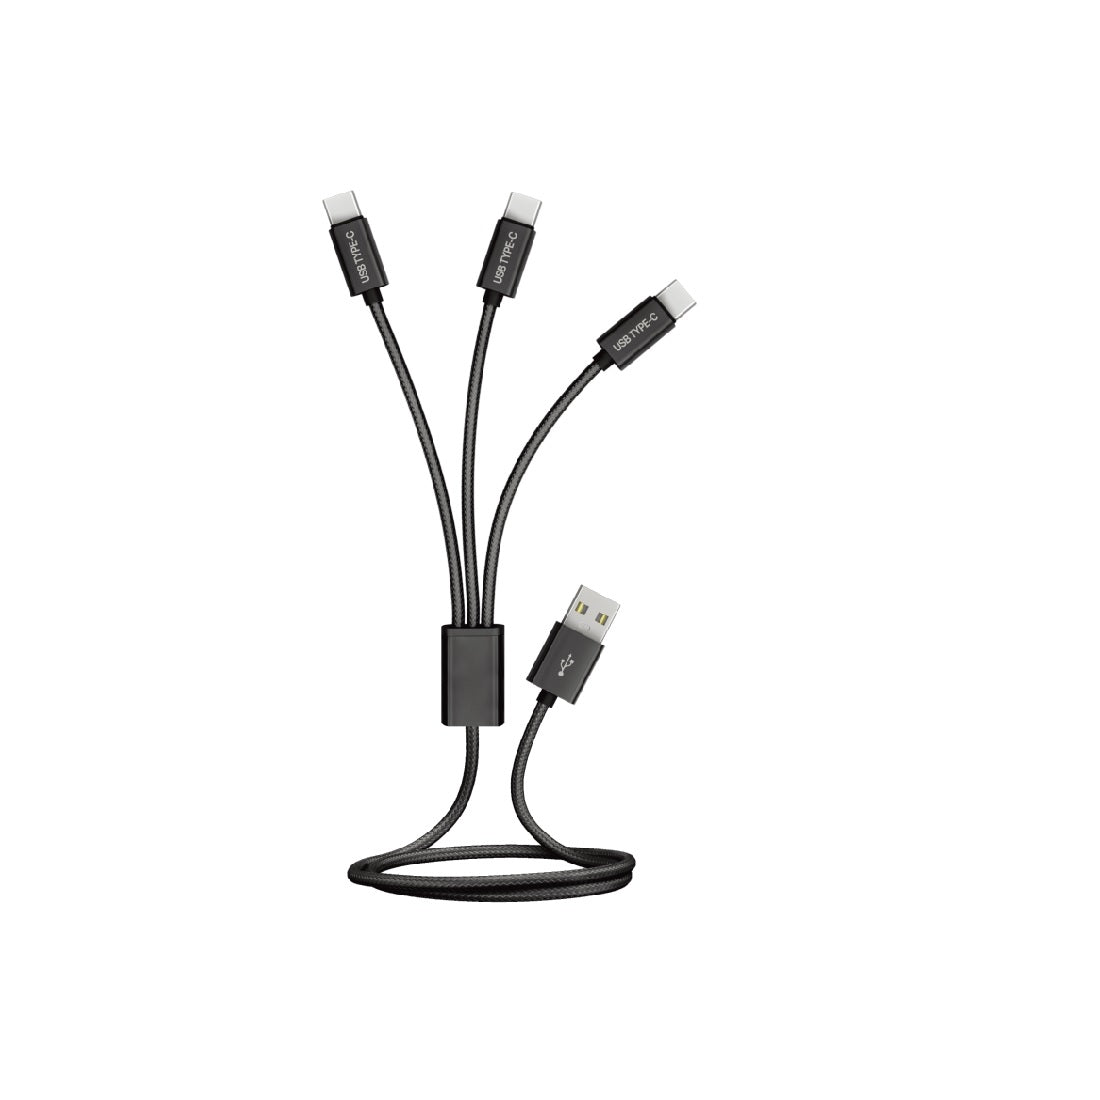 MINISO DURABLE 1.8M 3-IN-1 TYPE-C CHARGING CABLE 2A - PDQ NOT INCLUDED 2012091810107 TYPE-C CHARGING CABLE